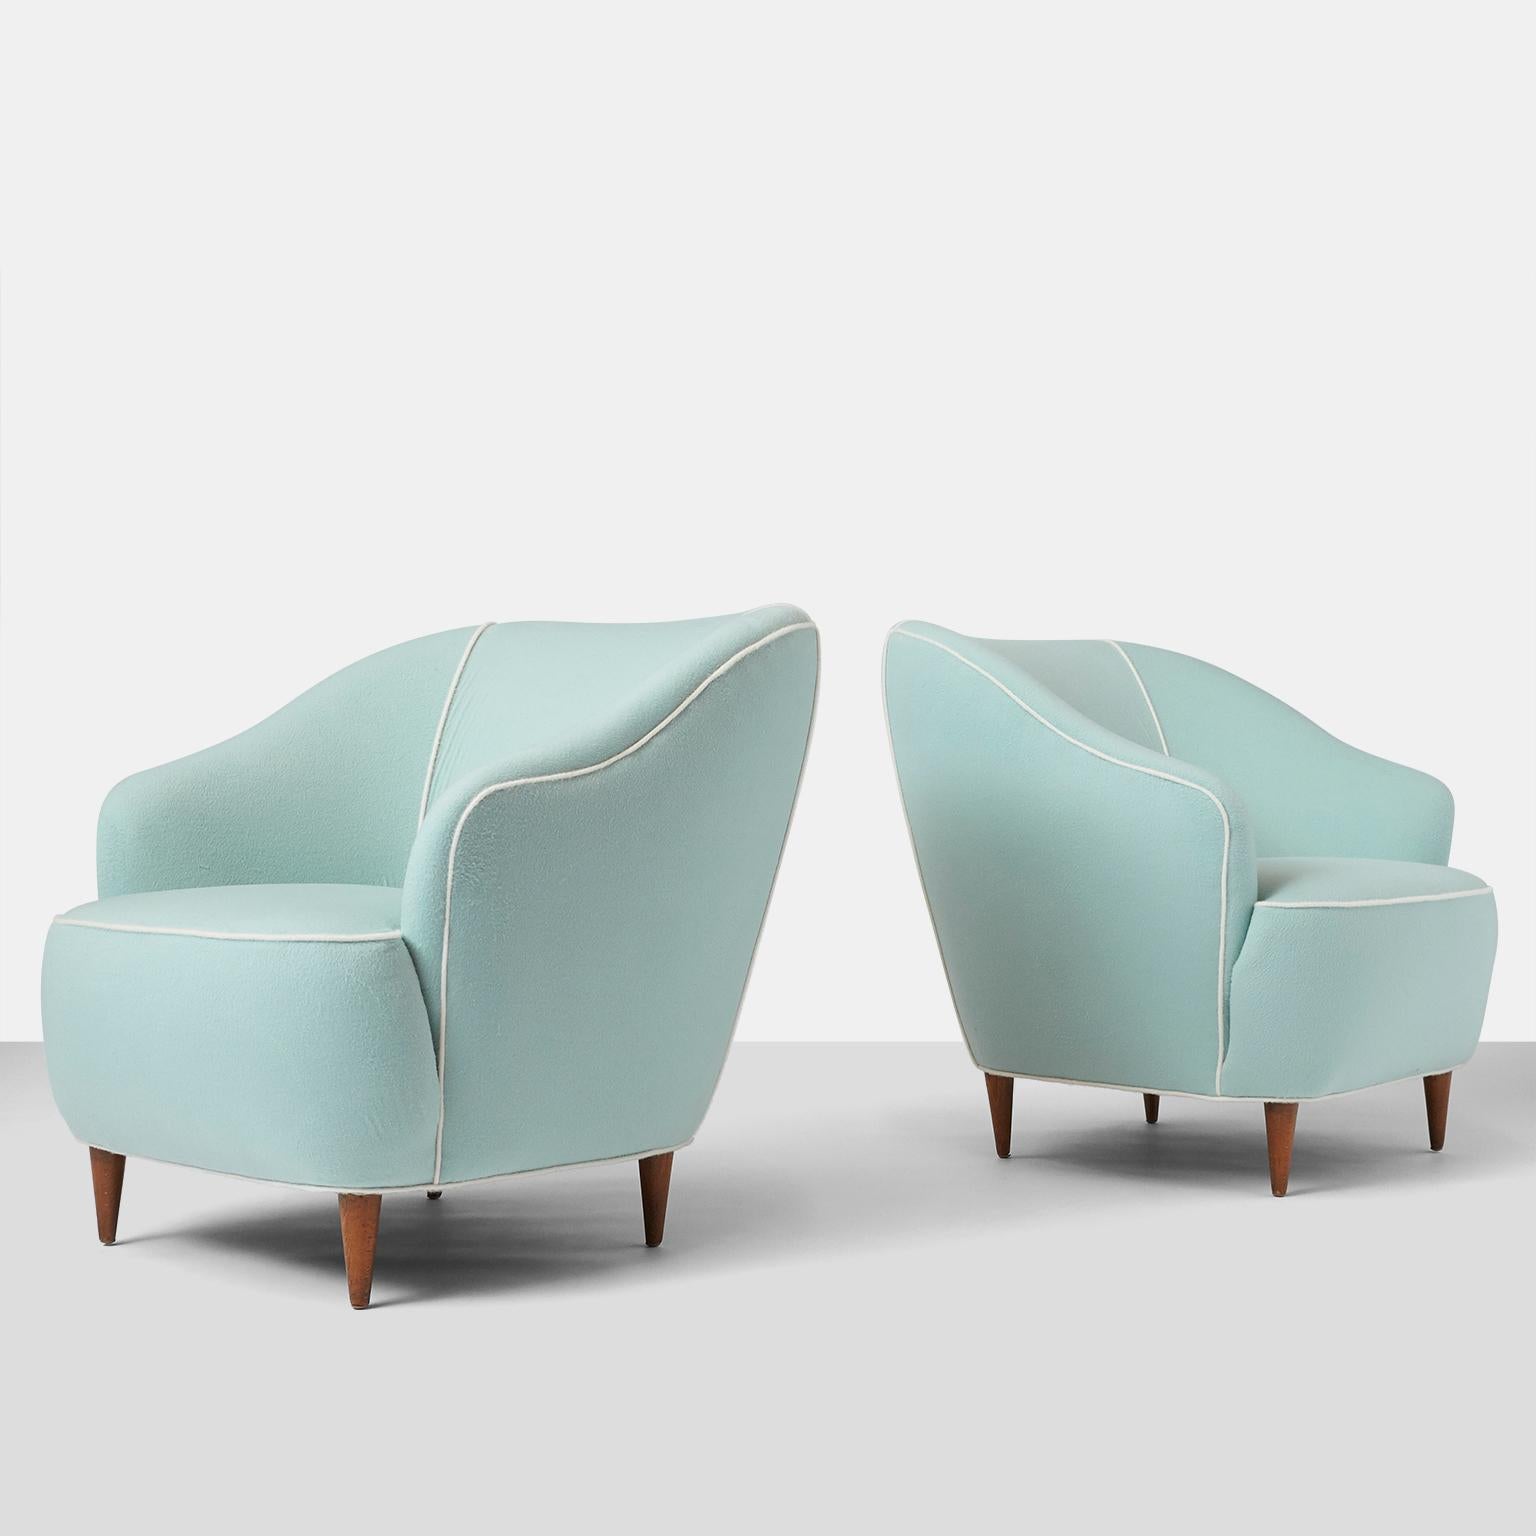 Pair of club chairs by Gio Ponti for Casa Giardino.
A pair of lounge chairs designed by Gio Ponti for Casa Giardino in Italy, circa 1938. The chairs have been completely restored in a luxurious Prima Alpaca from Sandra Jordan with contrast alpaca